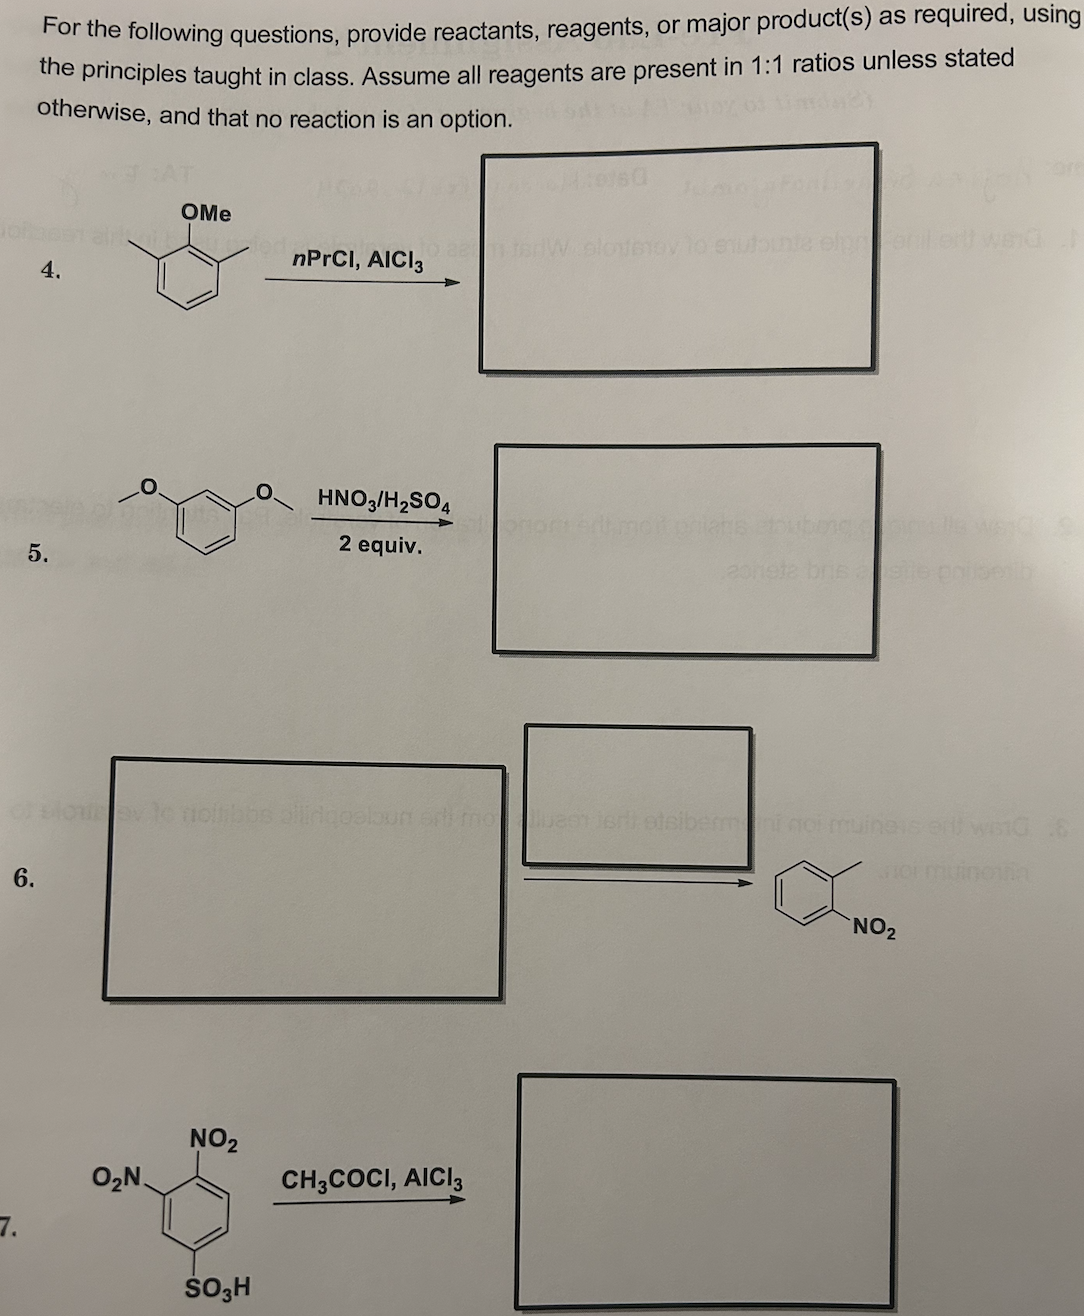 For the following questions, provide reactants, reagents, or major product(s) as required, using
the principles taught in class. Assume all reagents are present in 1:1 ratios unless stated
otherwise, and that no reaction is an option.
6.
7.
4.
5.
OMe
O₂N.
of slowev nollibbs allirqosloun sri molueen jerli etsibermeni noi muinais erf wiG 8
Joi muinoin
NO₂
nPrCI, AICI 3
SO3H
HNO3/H₂SO4
2 equiv.
W slonterov to snutounte elperilert werd
CH3COCI, AICI 3
rit moitonians
NO₂